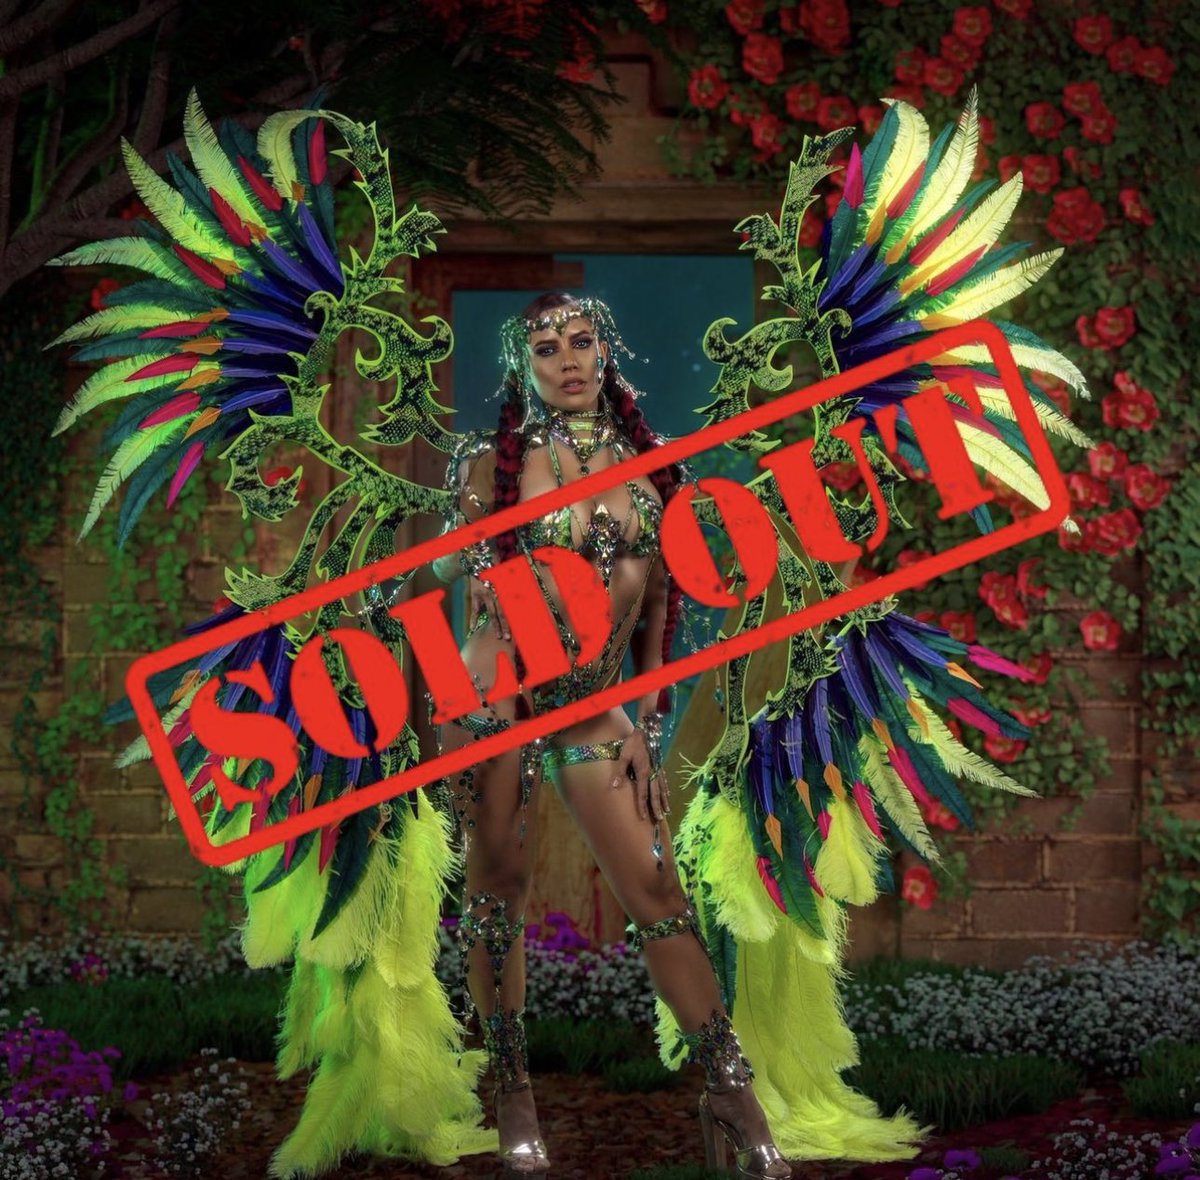 Looks like everyone wants to be a little poisonous 😉 Our Poison Ivy Individual costume is officially SOLD OUT! But don't worry, we still have other amazing options available - secure yours now at auraforcropover.com! 🌺🌿 #AuraExperience #Poisonlvy #SoldOut #EnchantedForest